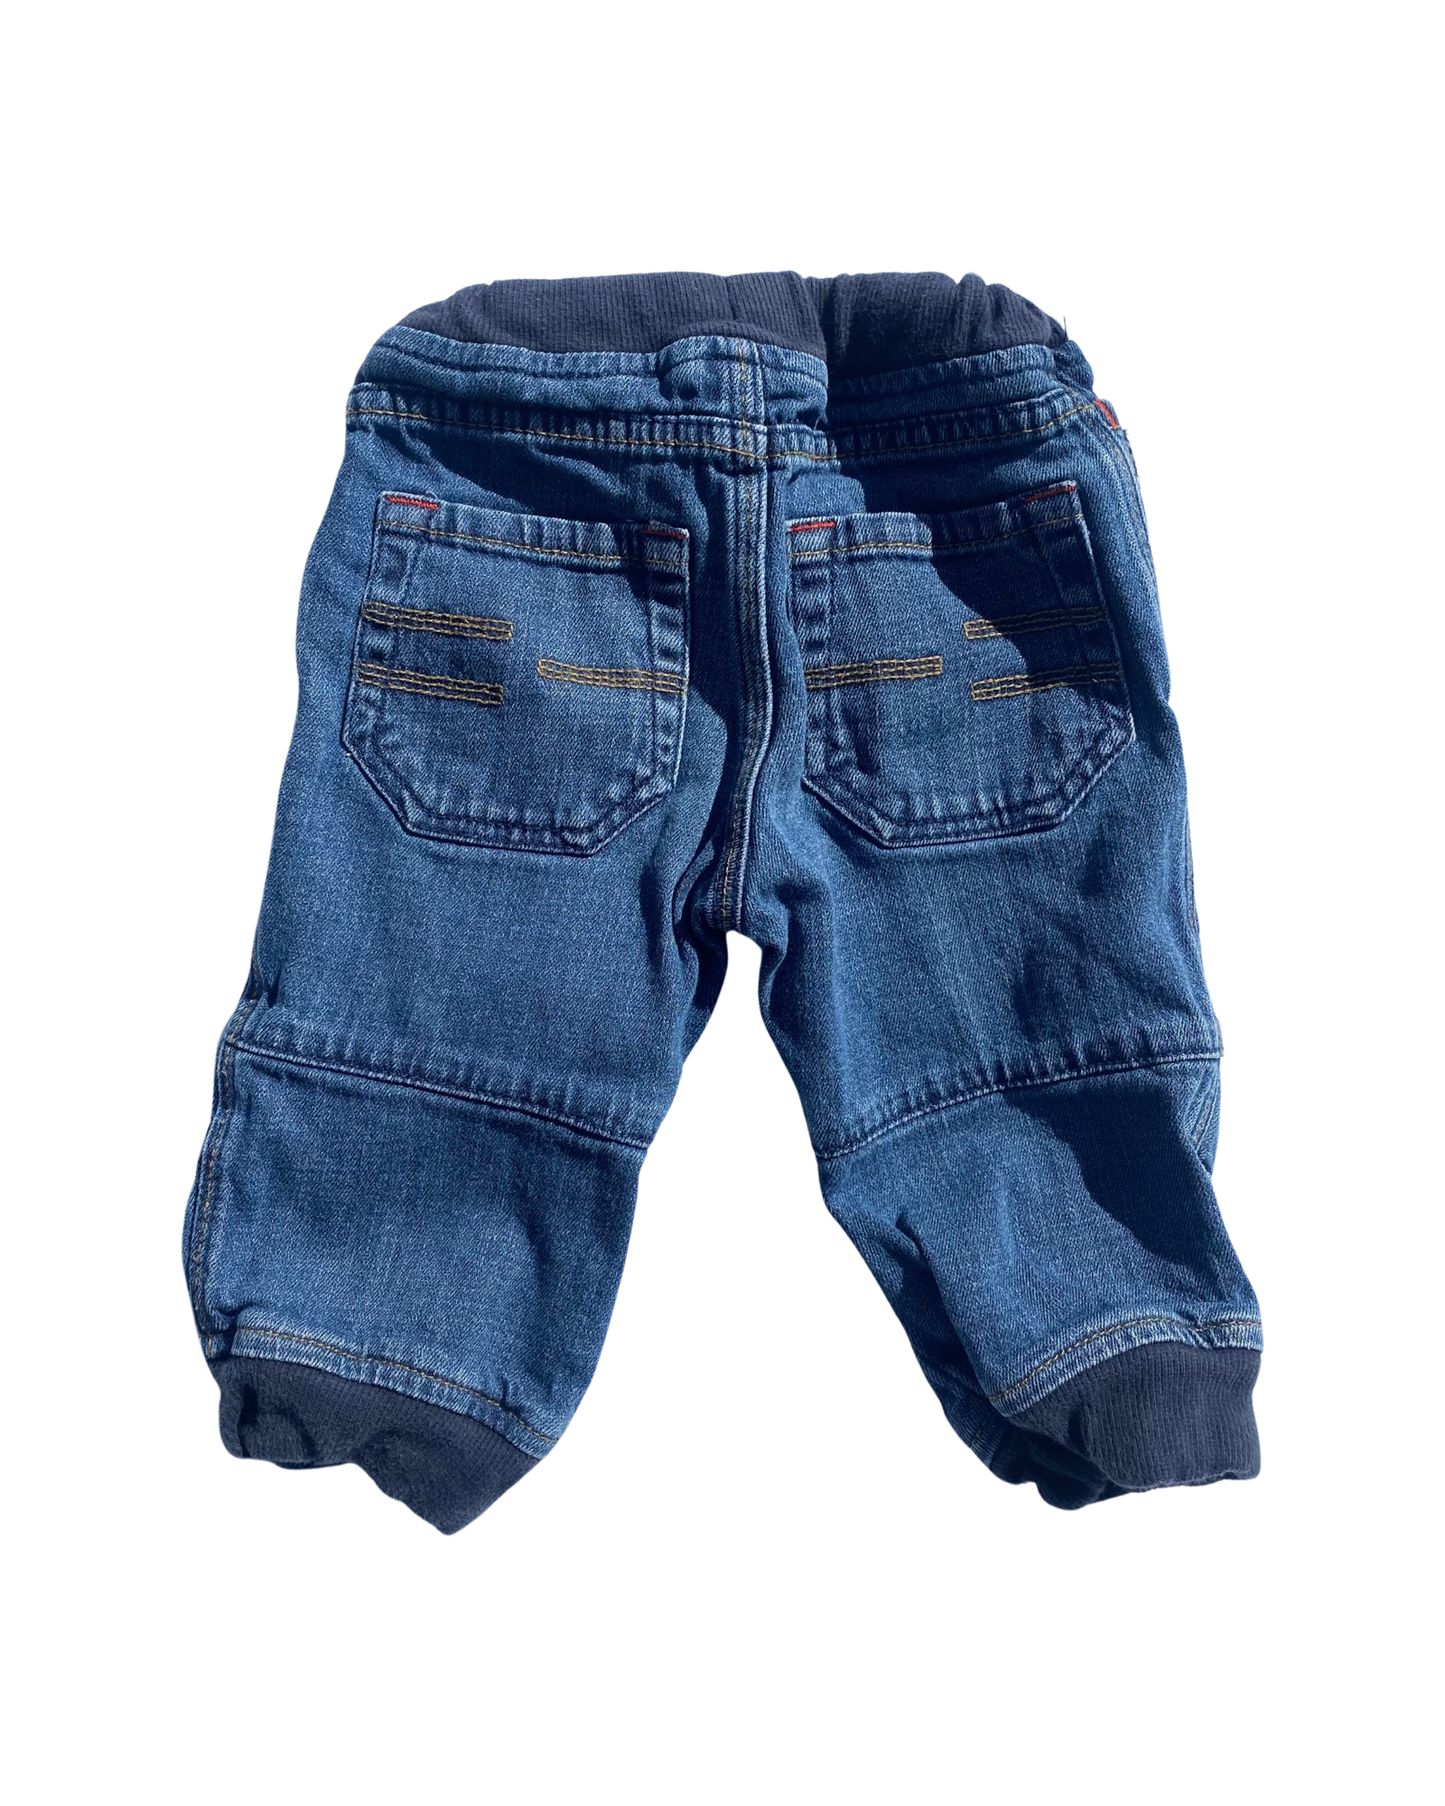 Polarn O.Pyret mid wash jeans (size 6-9 mths)